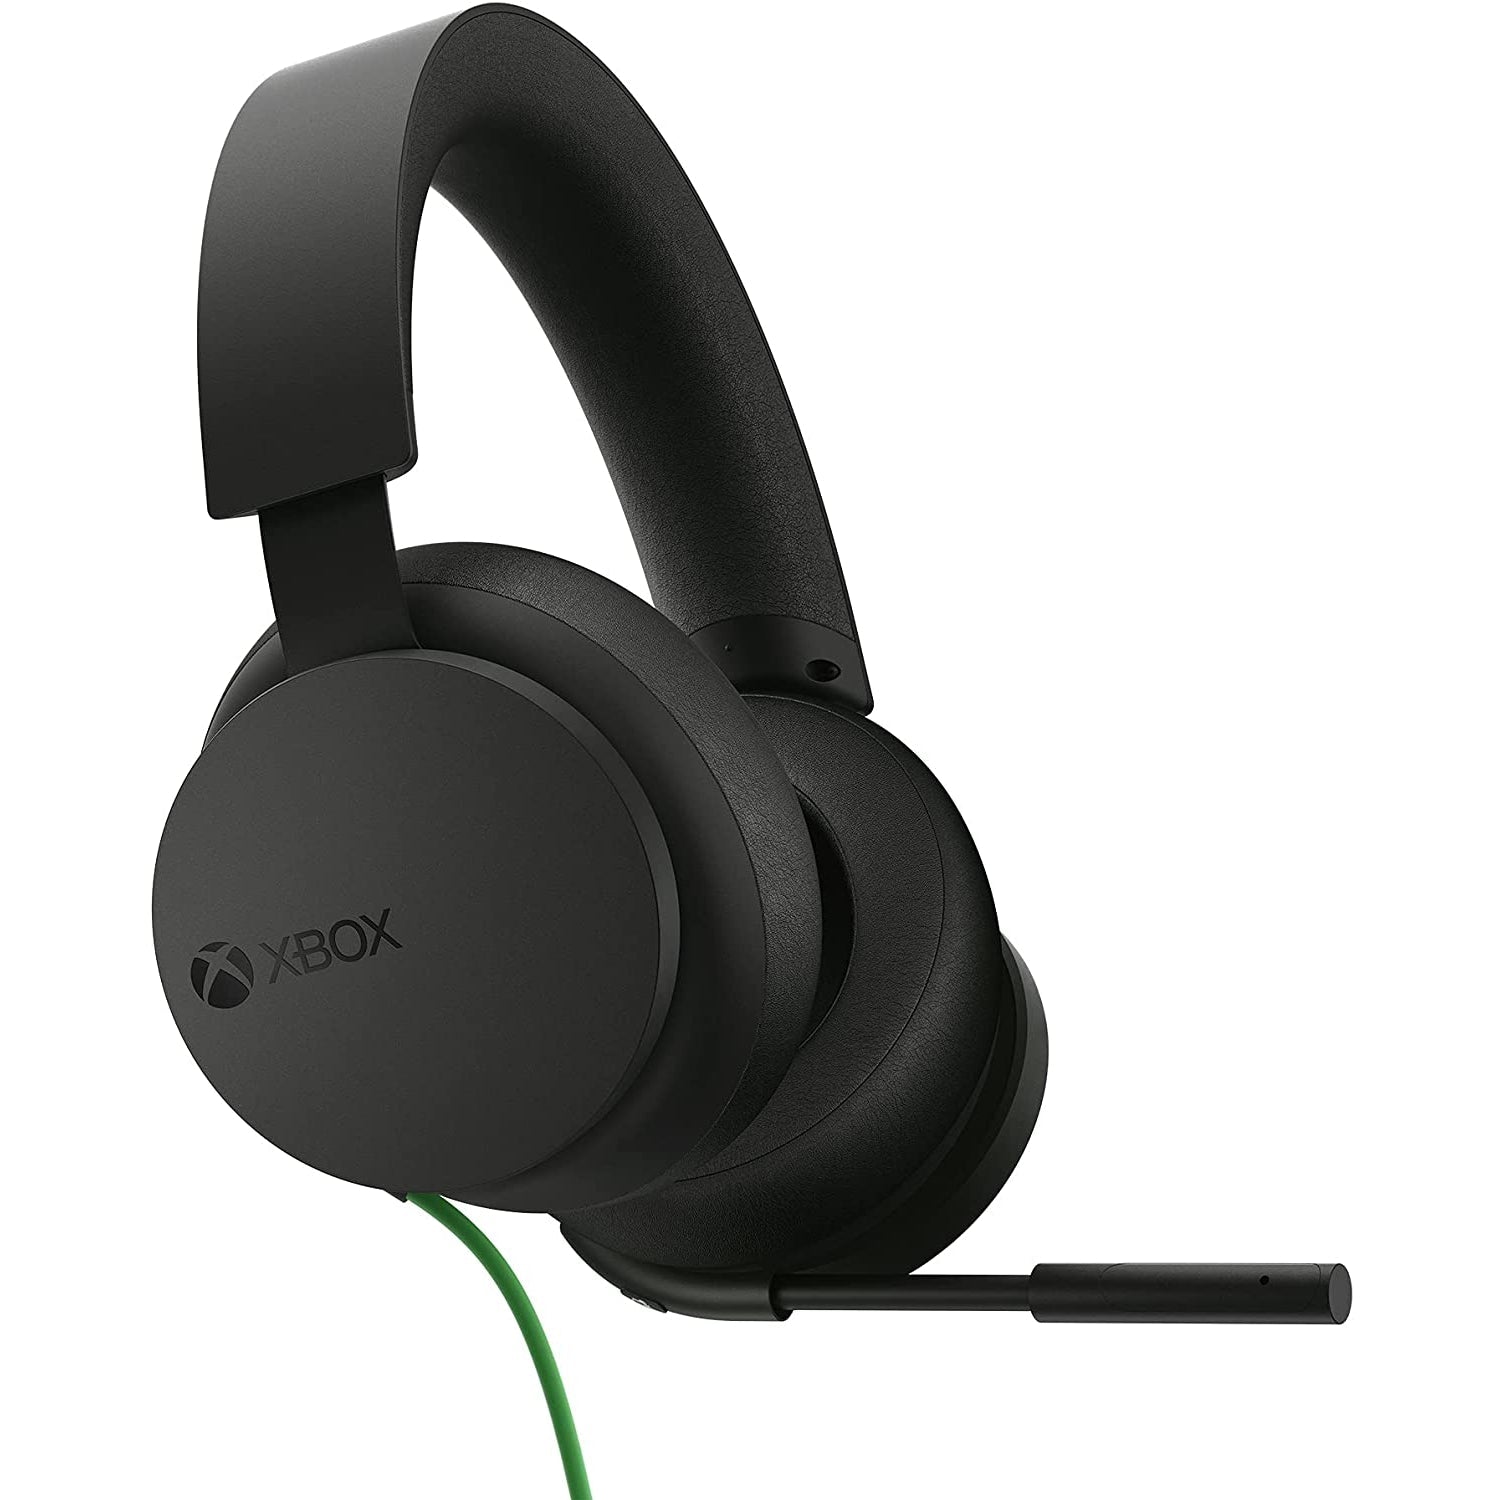 Xbox Stereo Wired Headset - Black - Refurbished Excellent